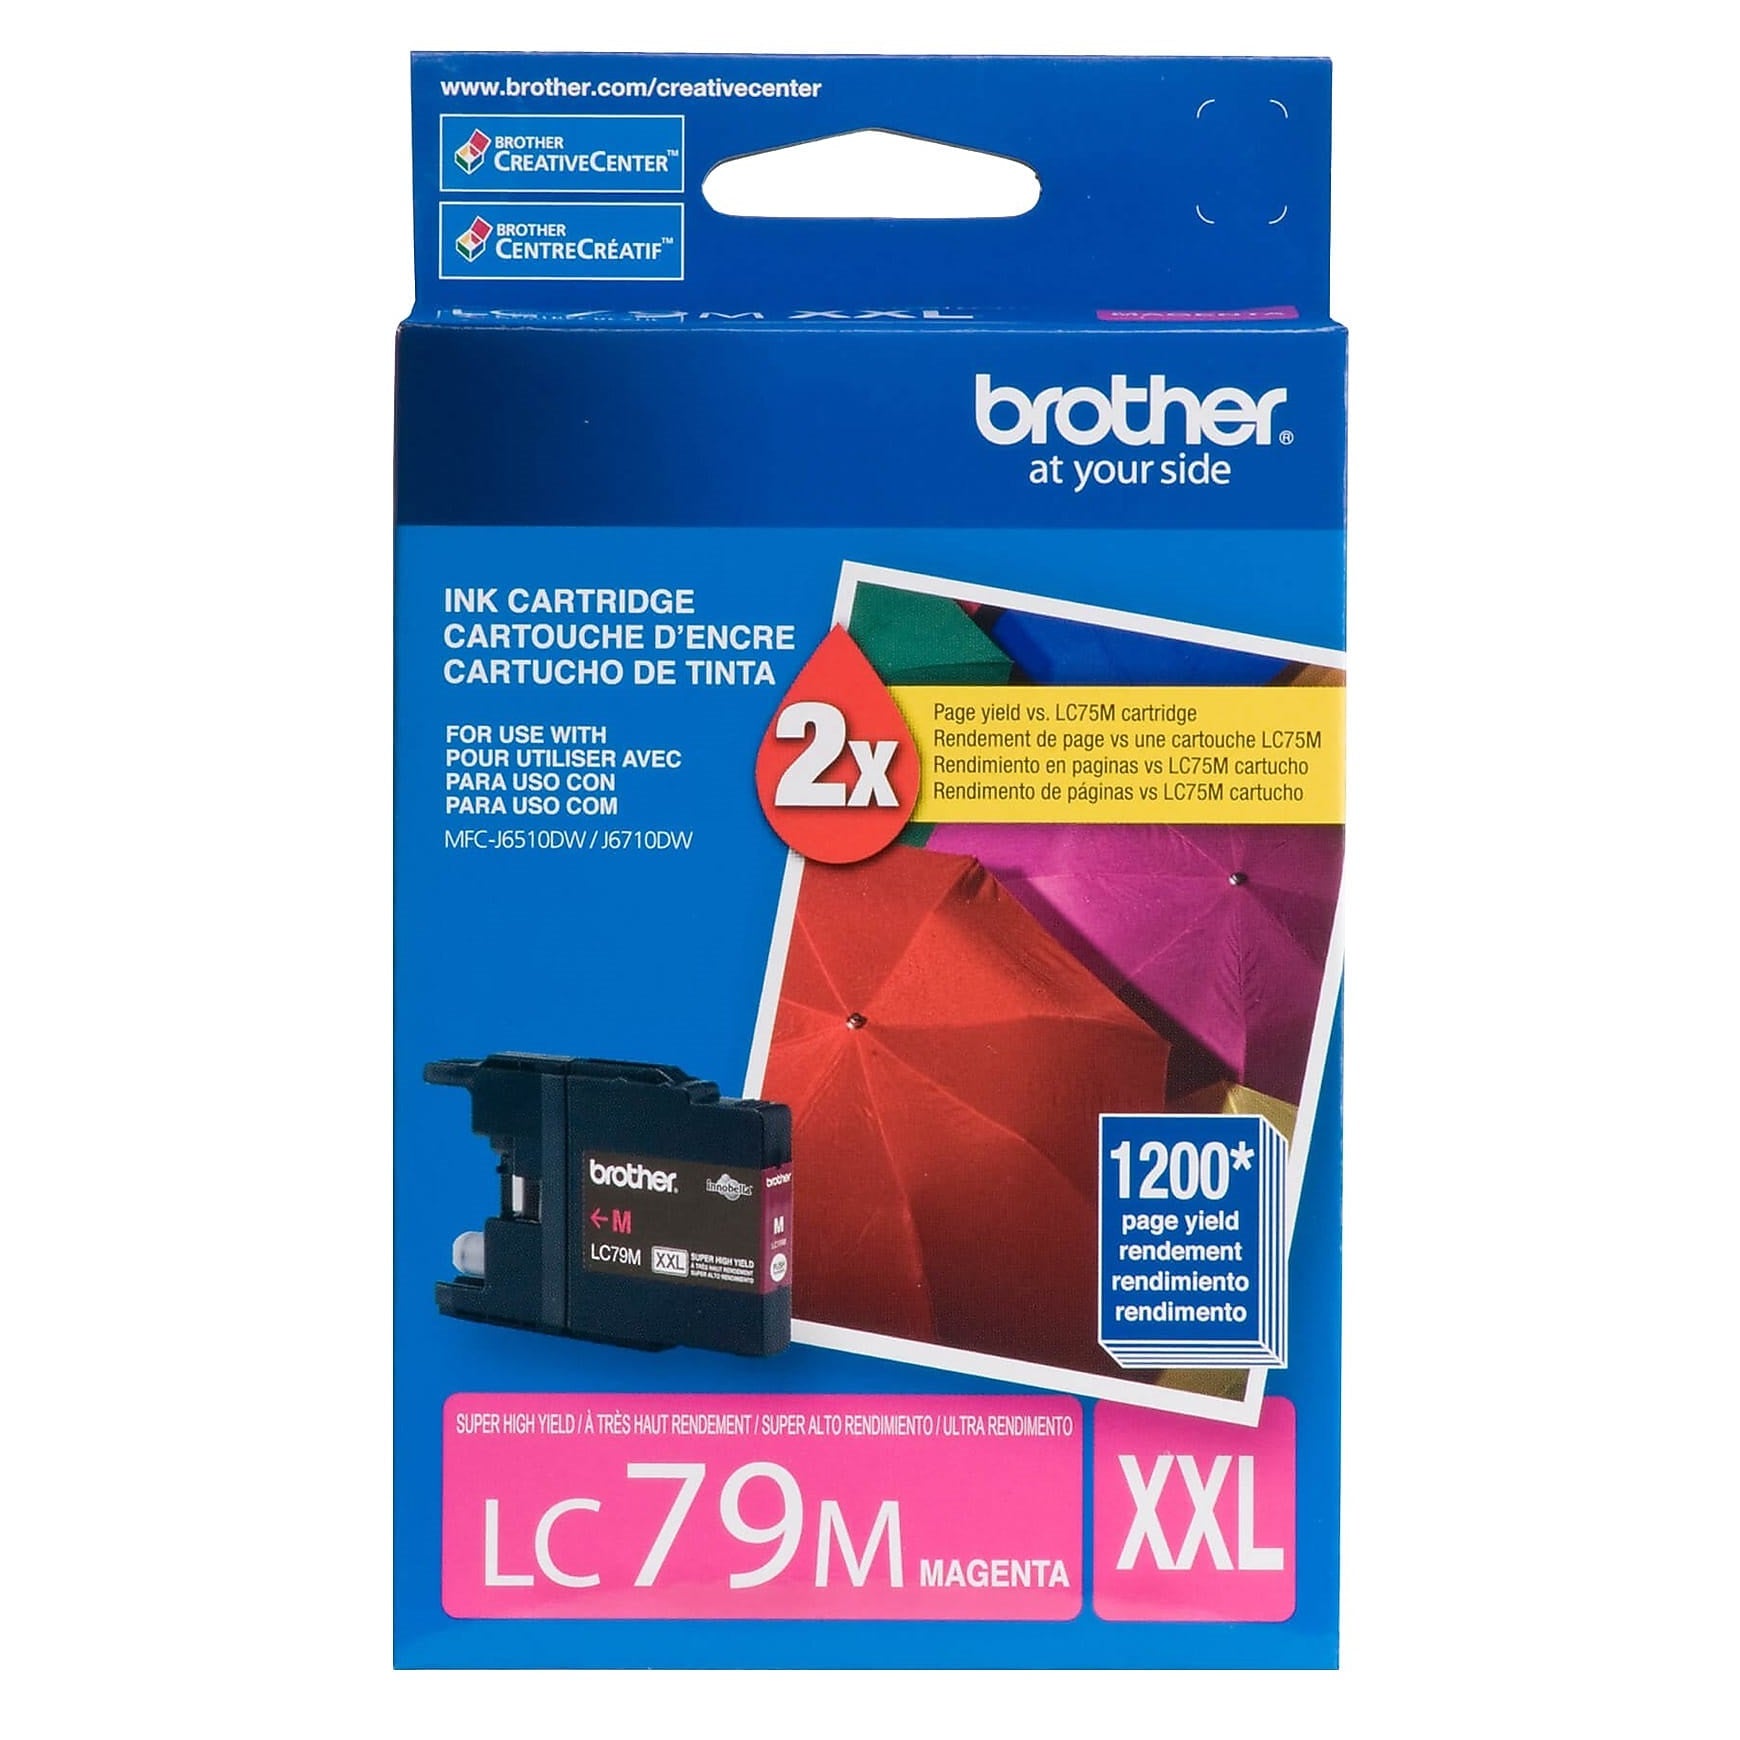 Absolute Toner Brother LC79MS Magenta Extra High Yield Genuine OEM Ink Cartridge Original Brother Cartridges